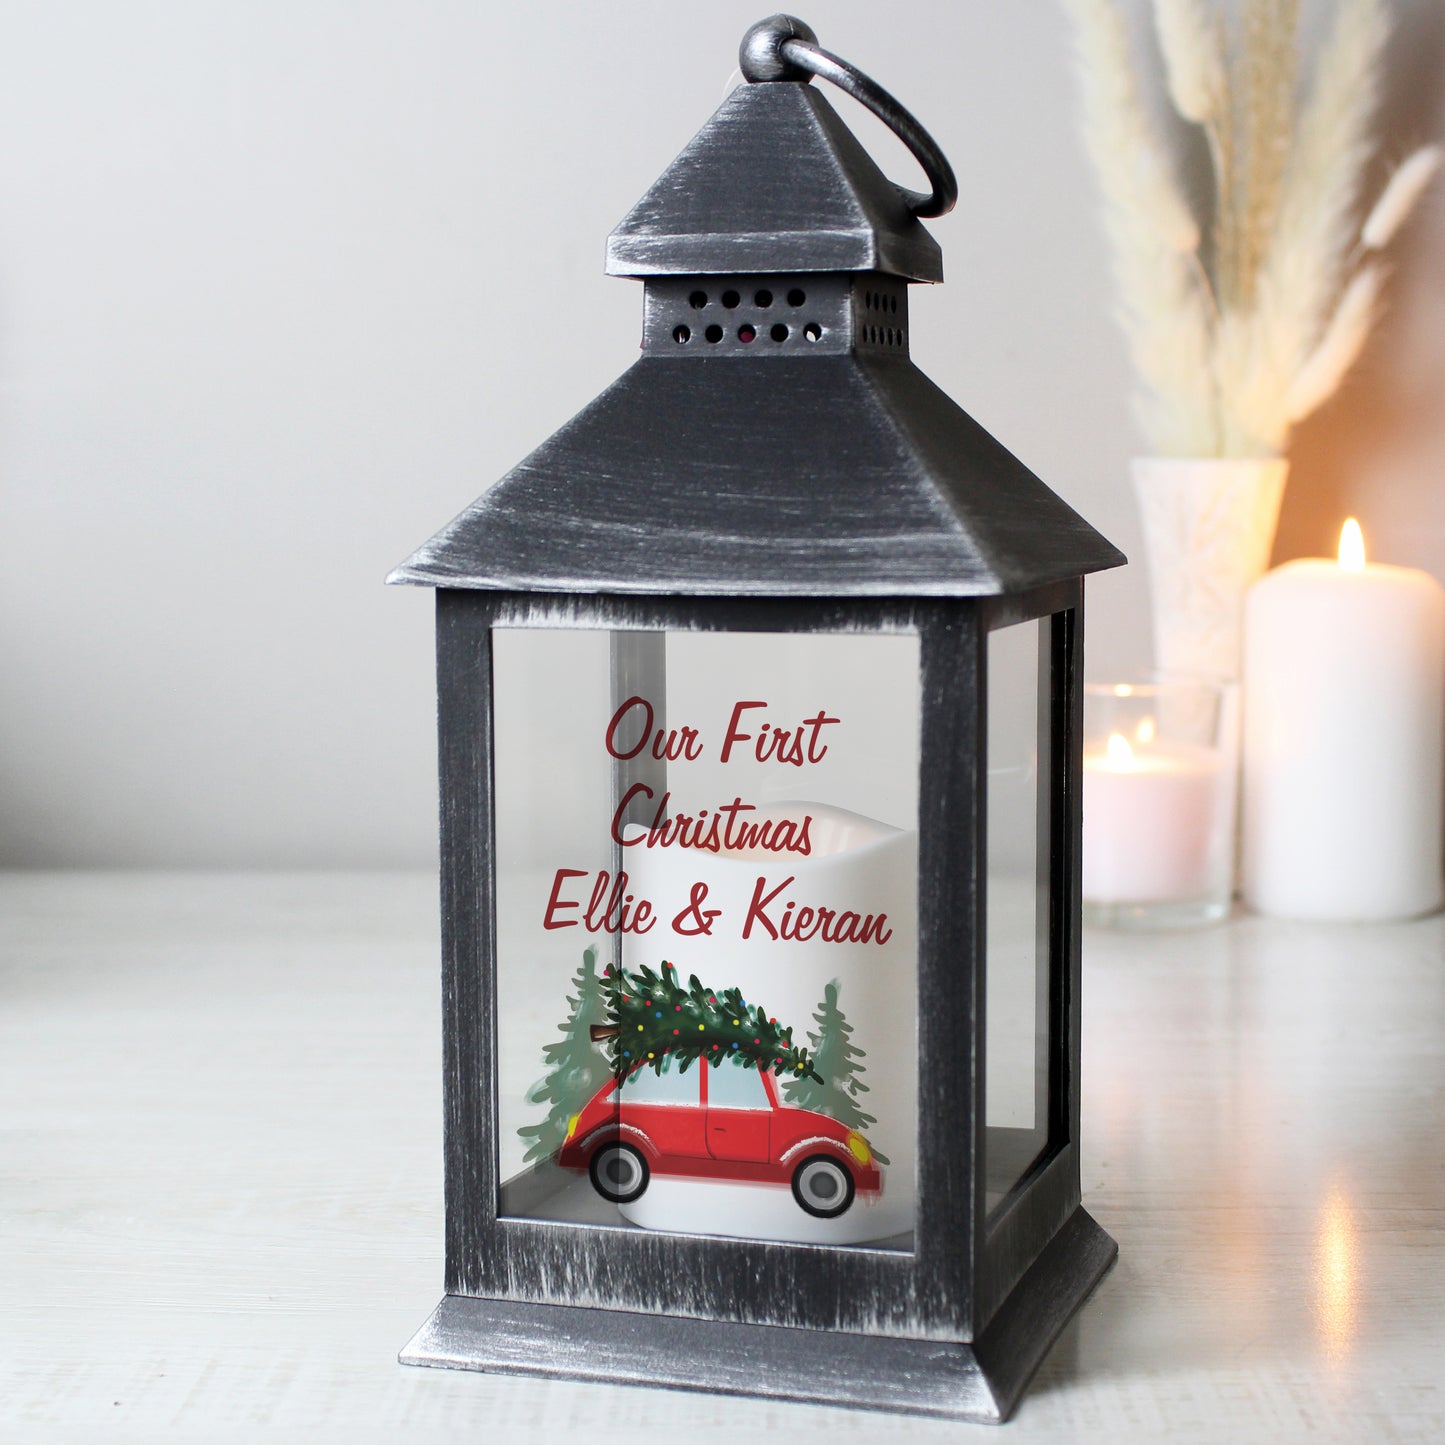 Personalised 'Driving Home For Christmas' Rustic Black Lantern - Personalise It!